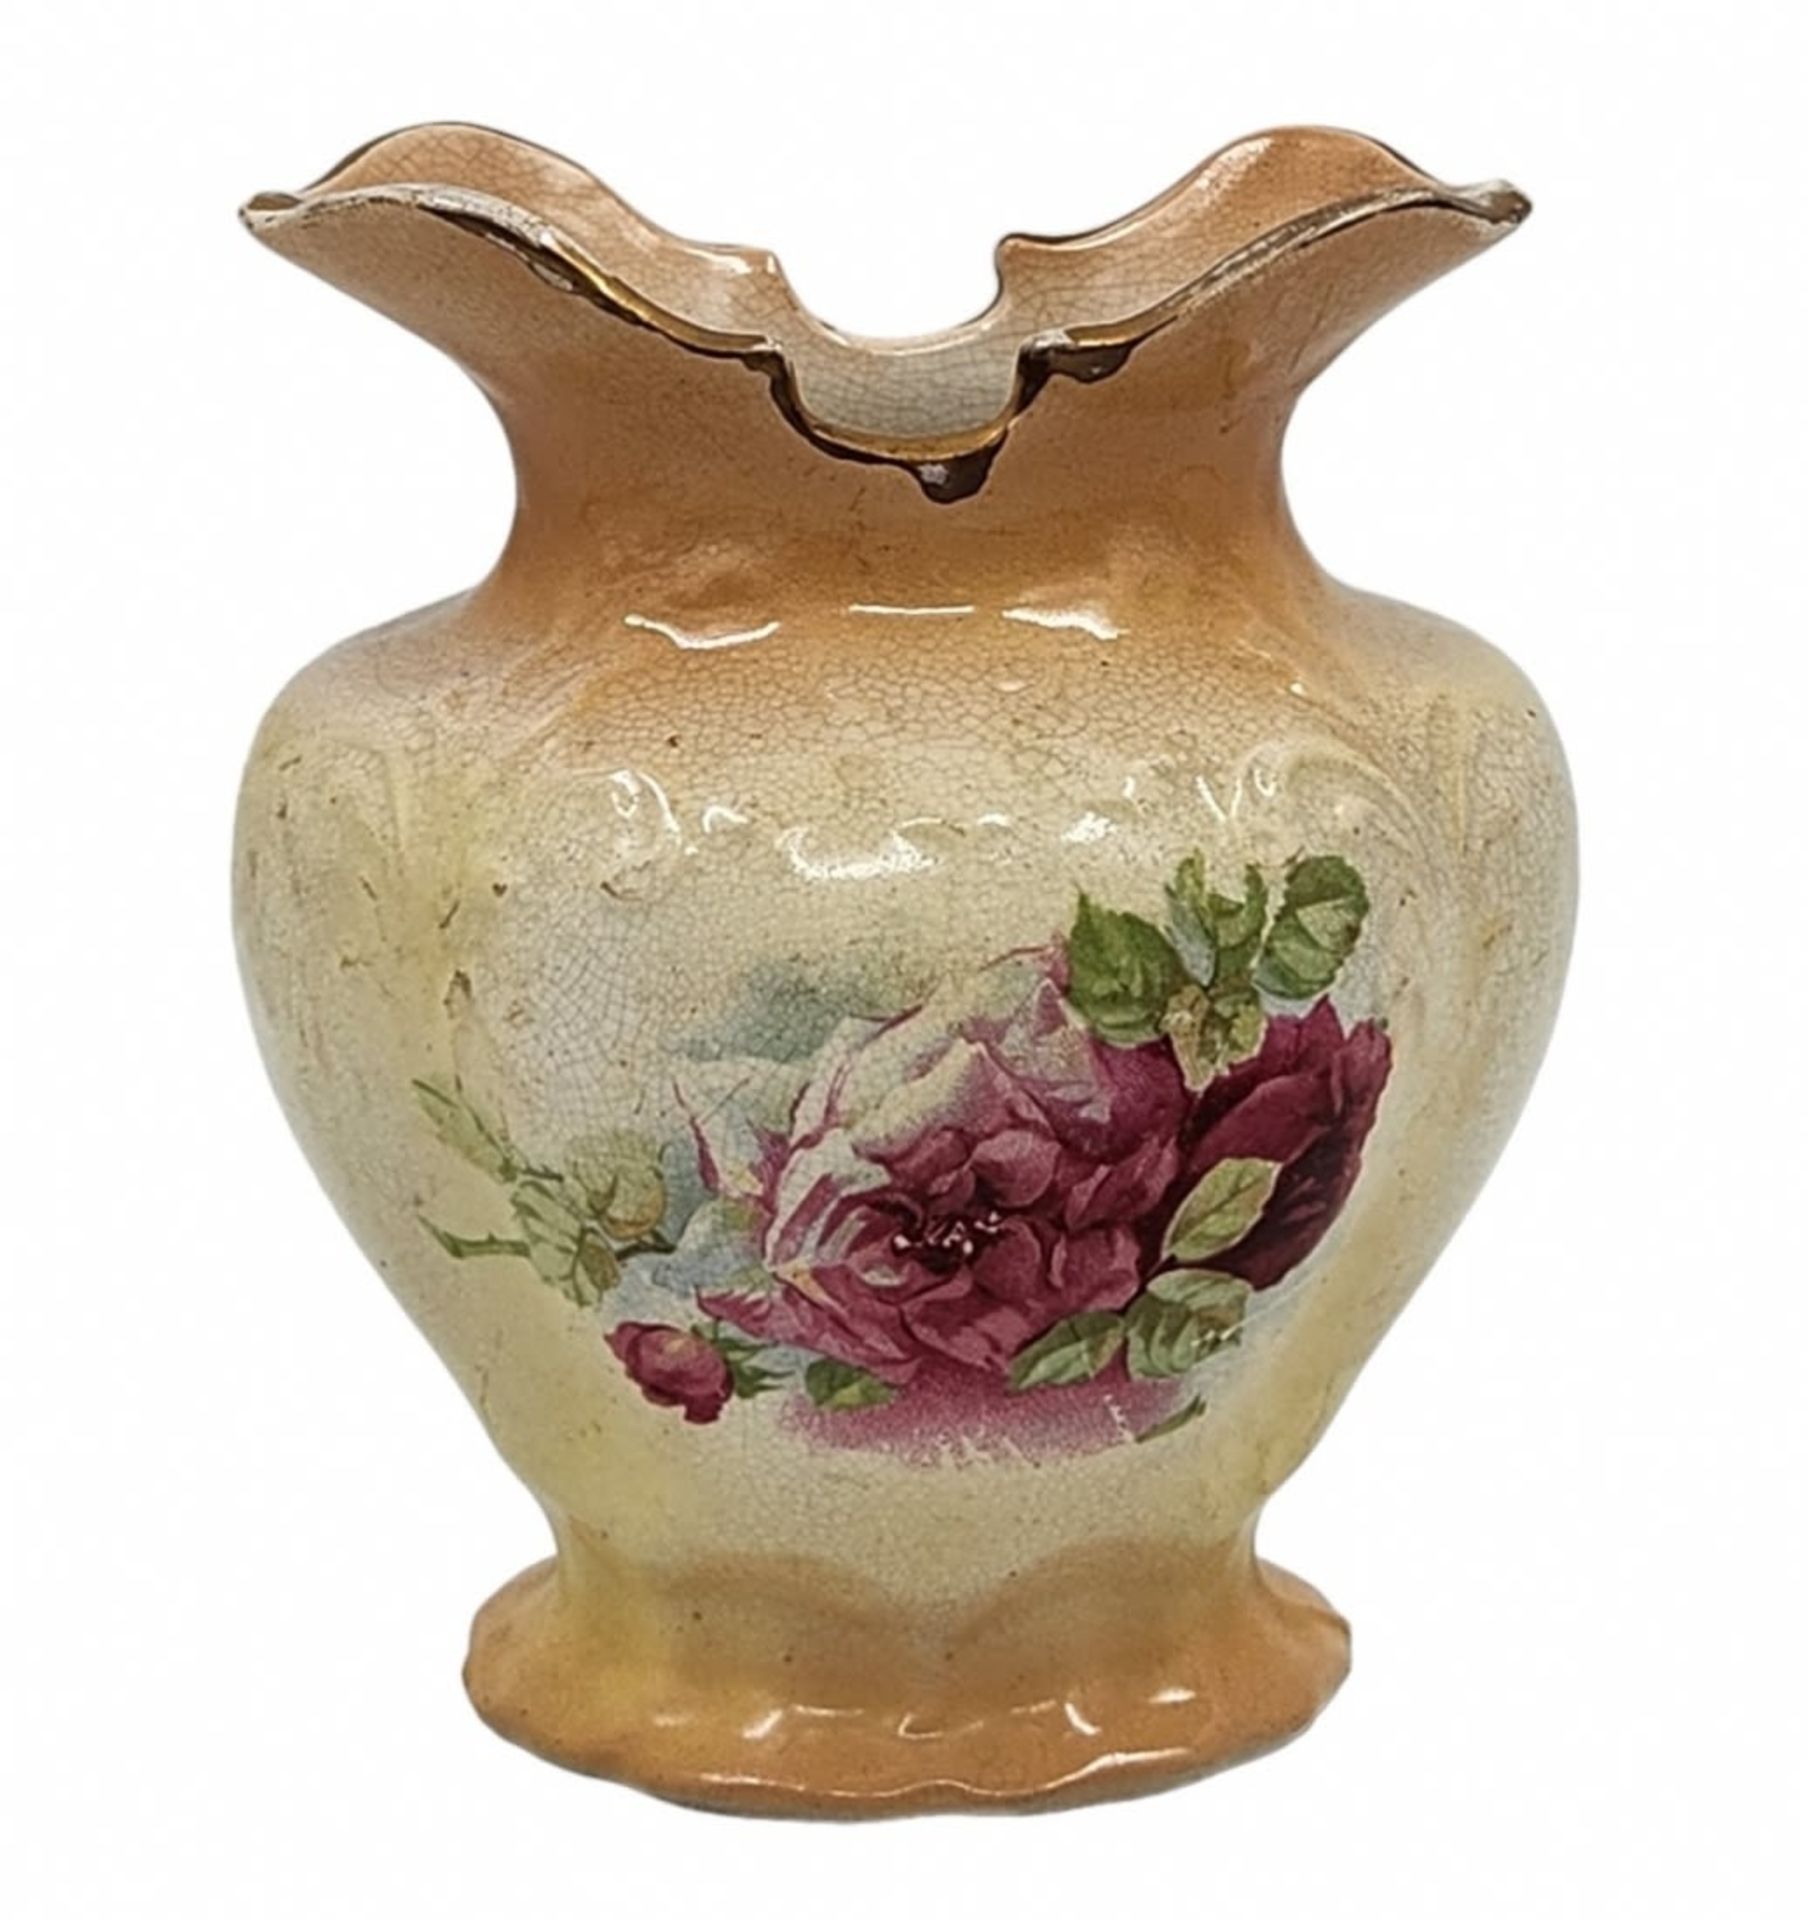 Antique Victorian English vase, made of pottery decorated with a print of blooming roses on a - Image 2 of 3